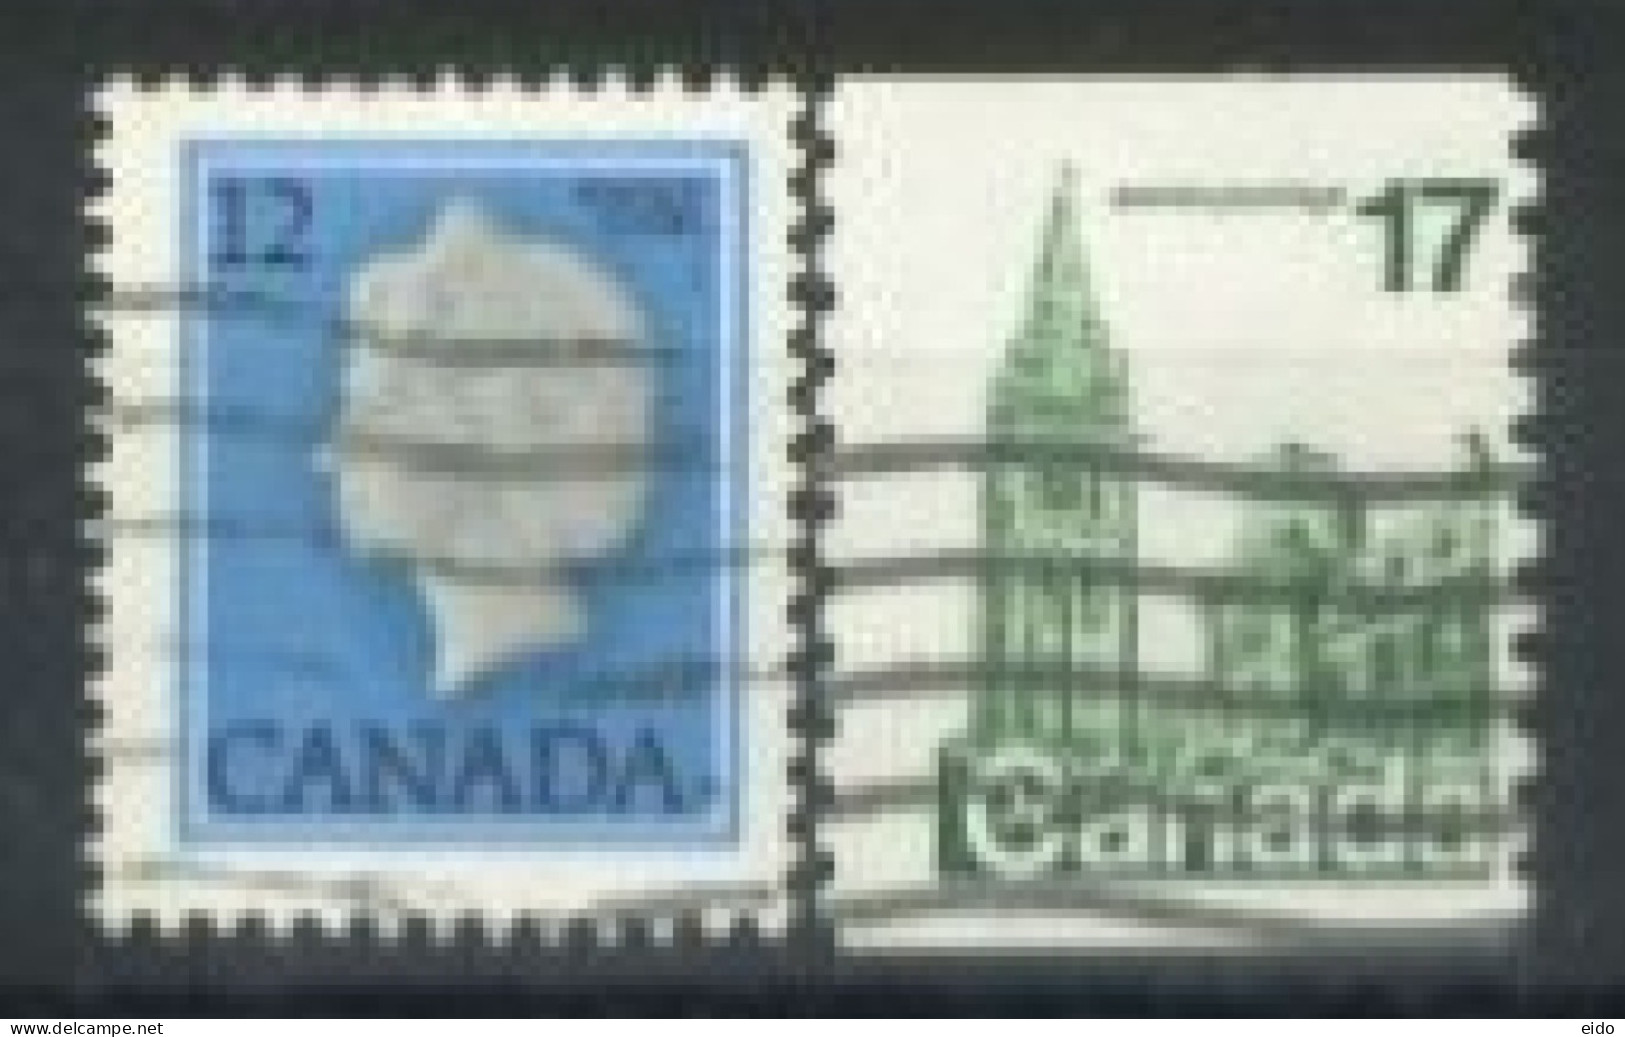 CANADA - 1977, QUEEN ELIZABETH II & HOUSE OF PARLIAMENT STAMPS SET OF 2, USED. - Used Stamps